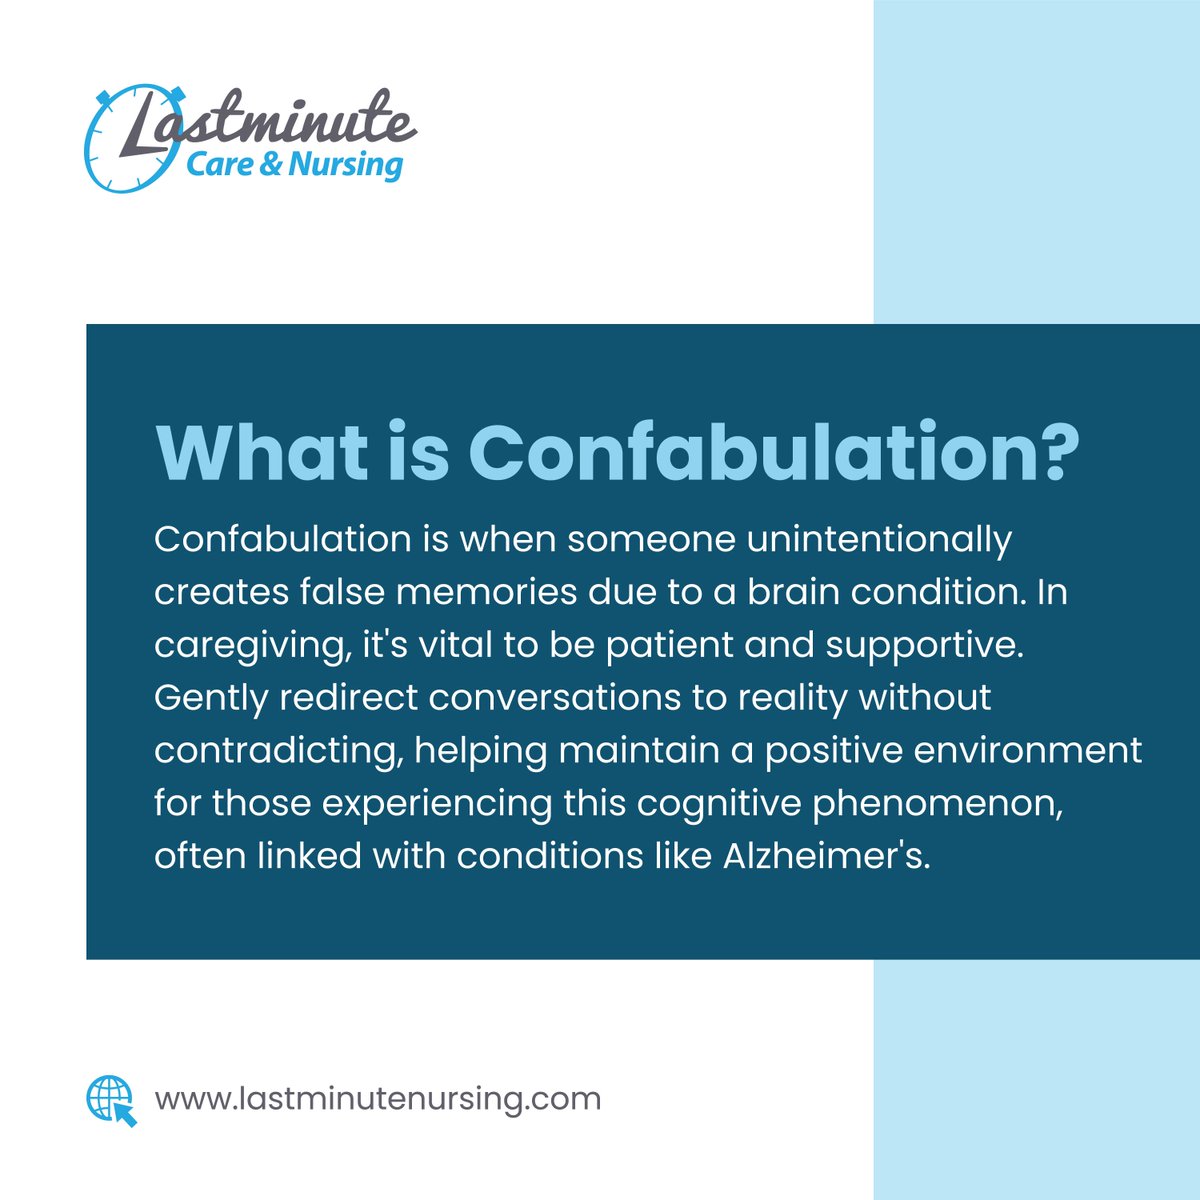 Confabulation, or creating false memories unintentionally due to a brain condition, is a challenge in caregiving.

#confabulation #lastminutenursing #careagency #alzheimer #alzheimersawareness #careworker #supportworker #careservices #dementiacare #caregiver #seniorcare